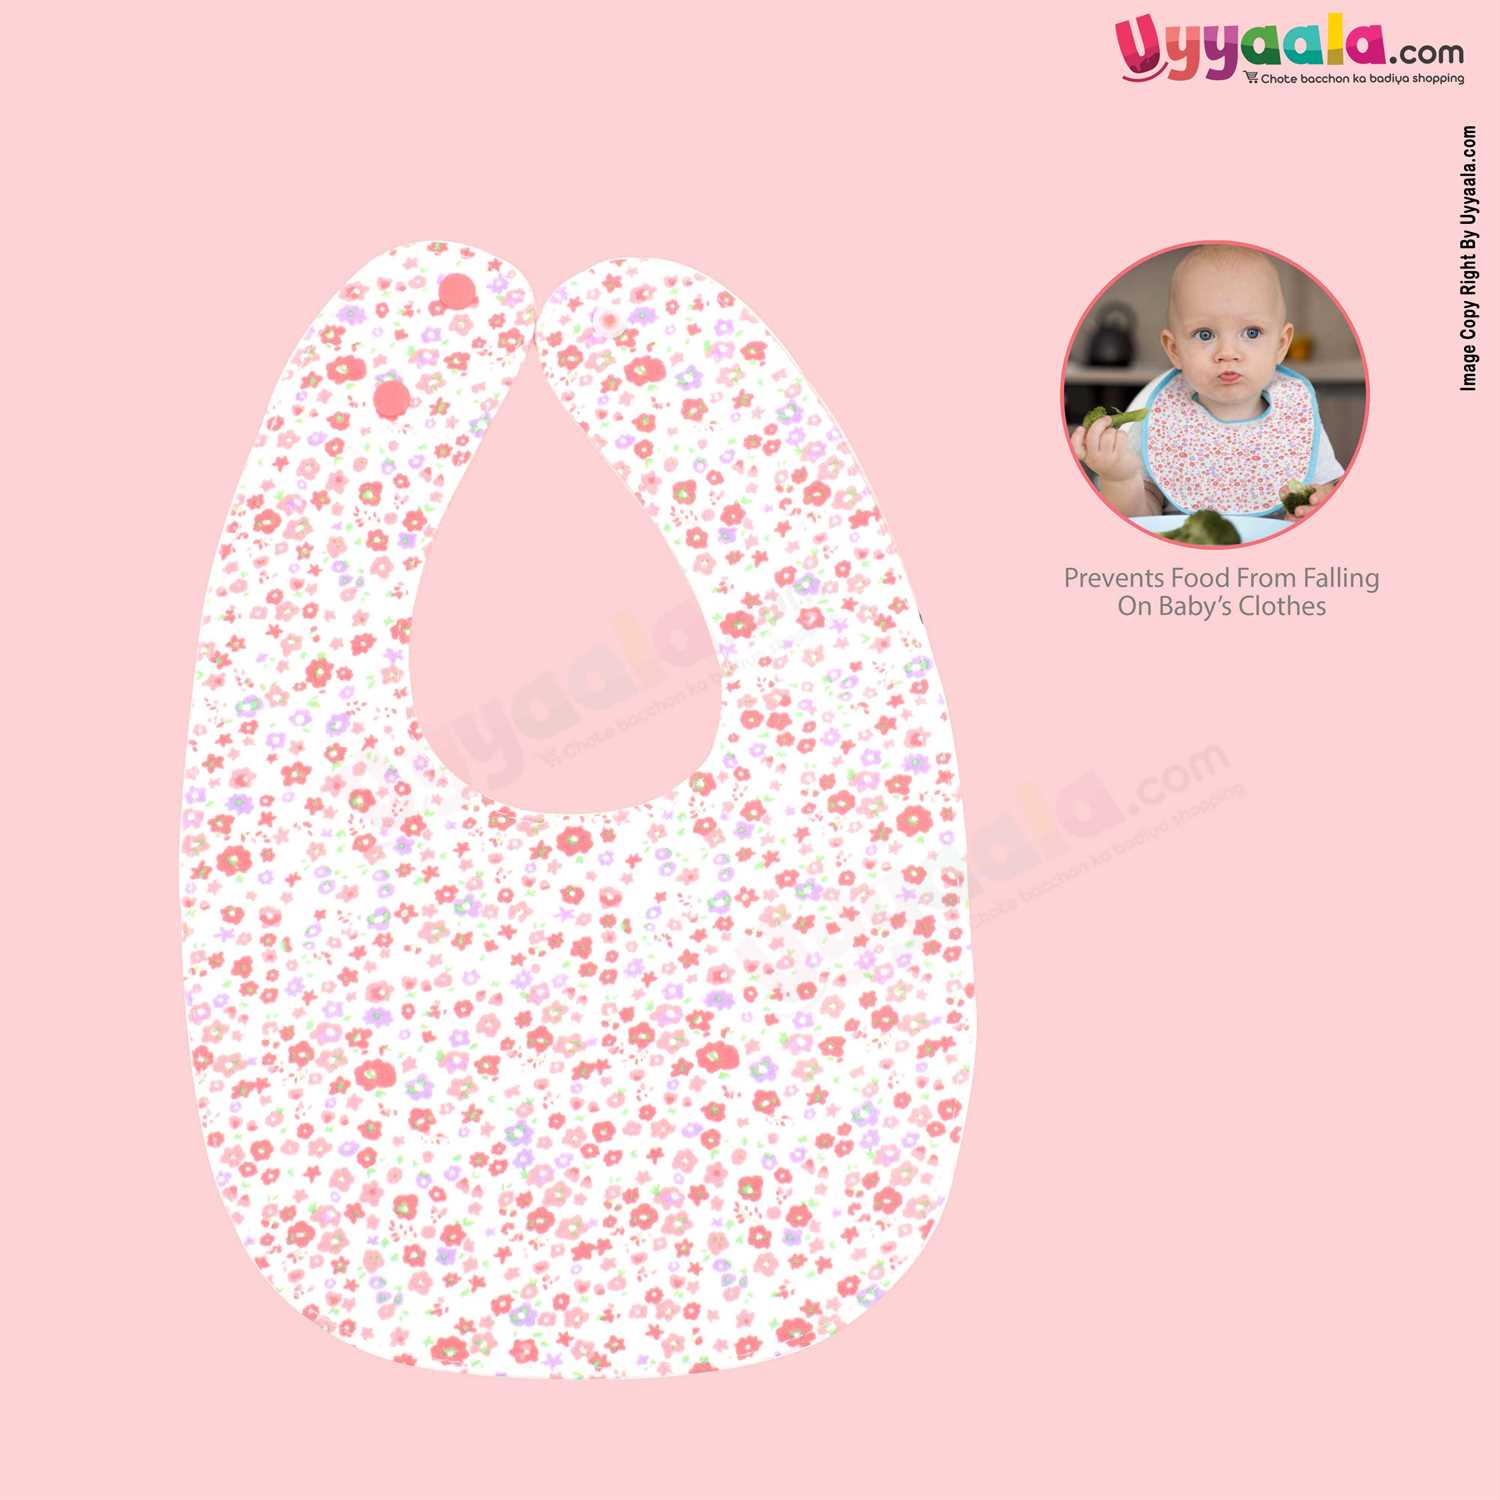 Baby Bib Soft Hosiery Cotton 2 in 1 Usable with Bow & Floral Print for Newborn, Size (29.5*20cm)- Peach & White